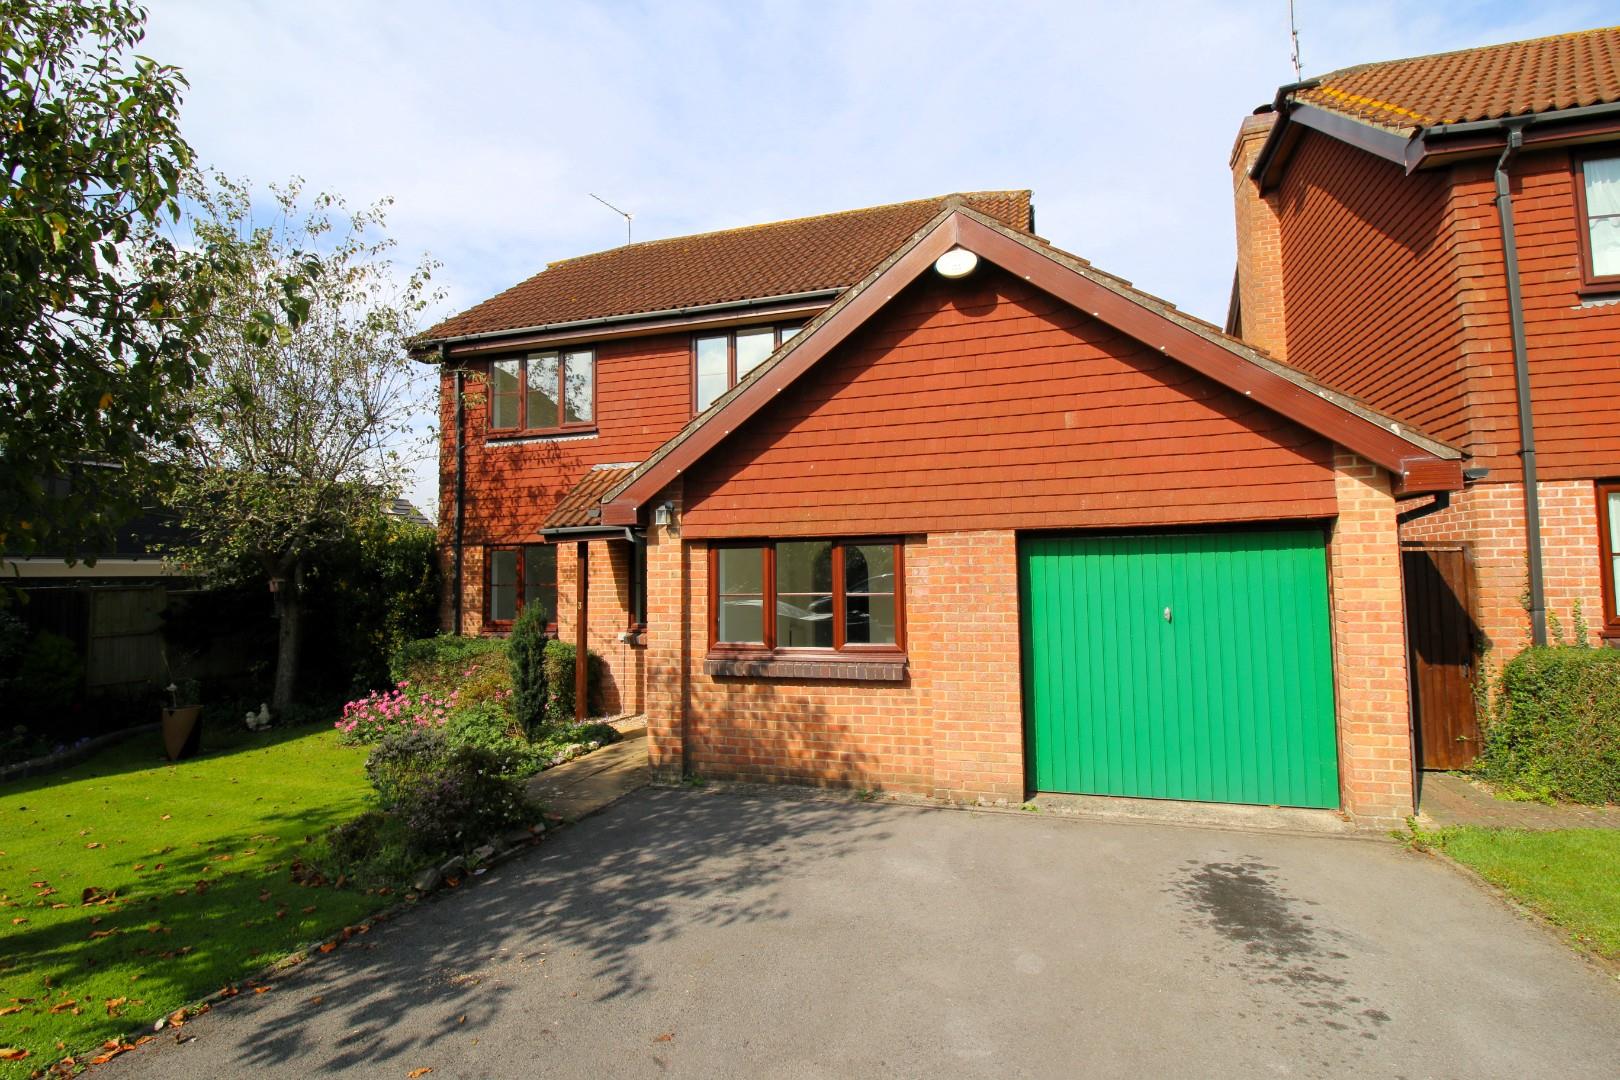 Detached family home in desirable cul-de-sac within the village of Congresbury